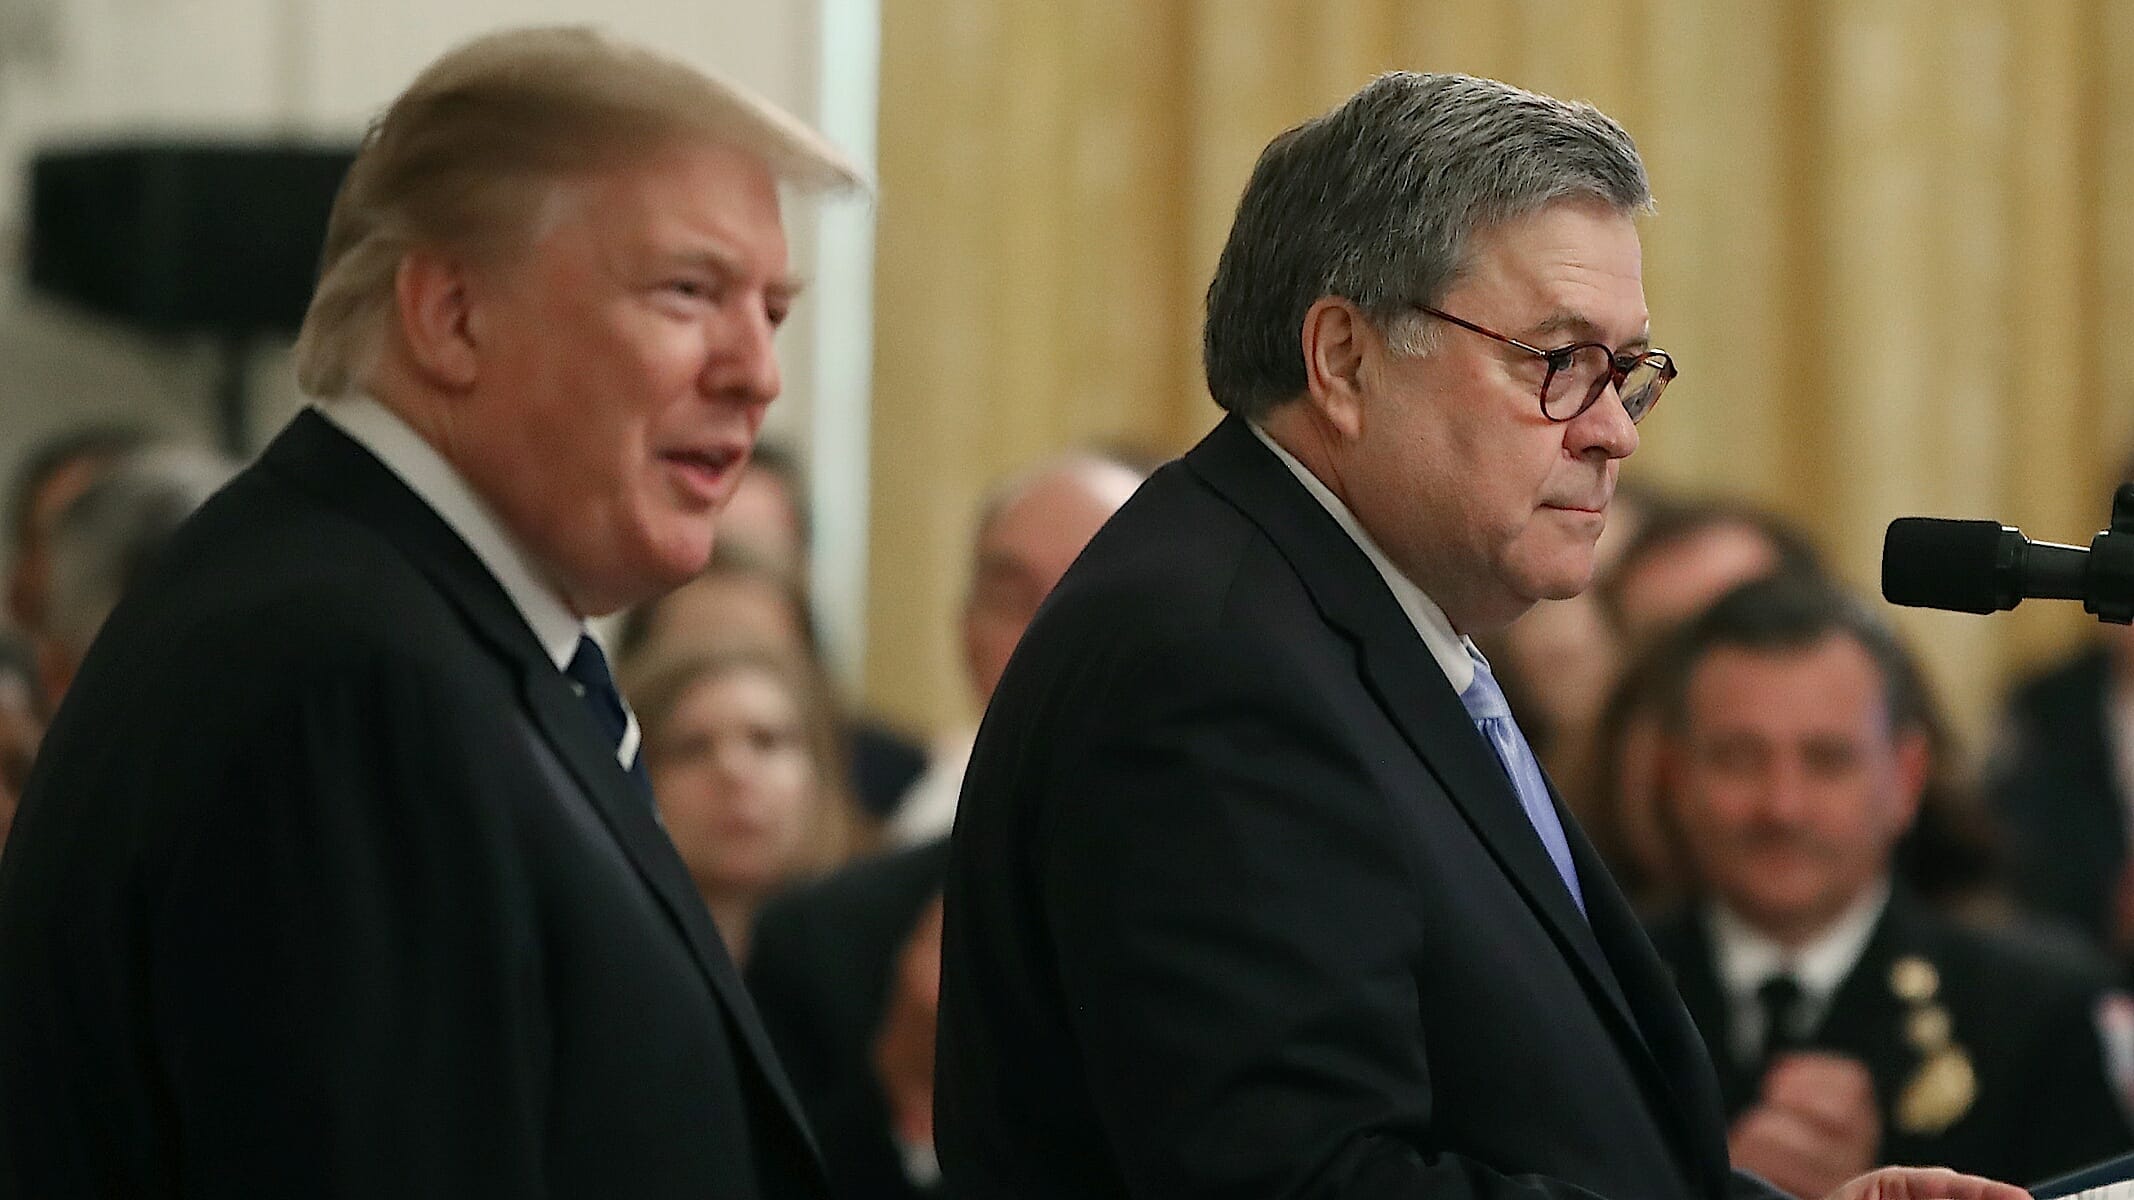 William Barr Is Asked About His Reputation, Goes Very Dark